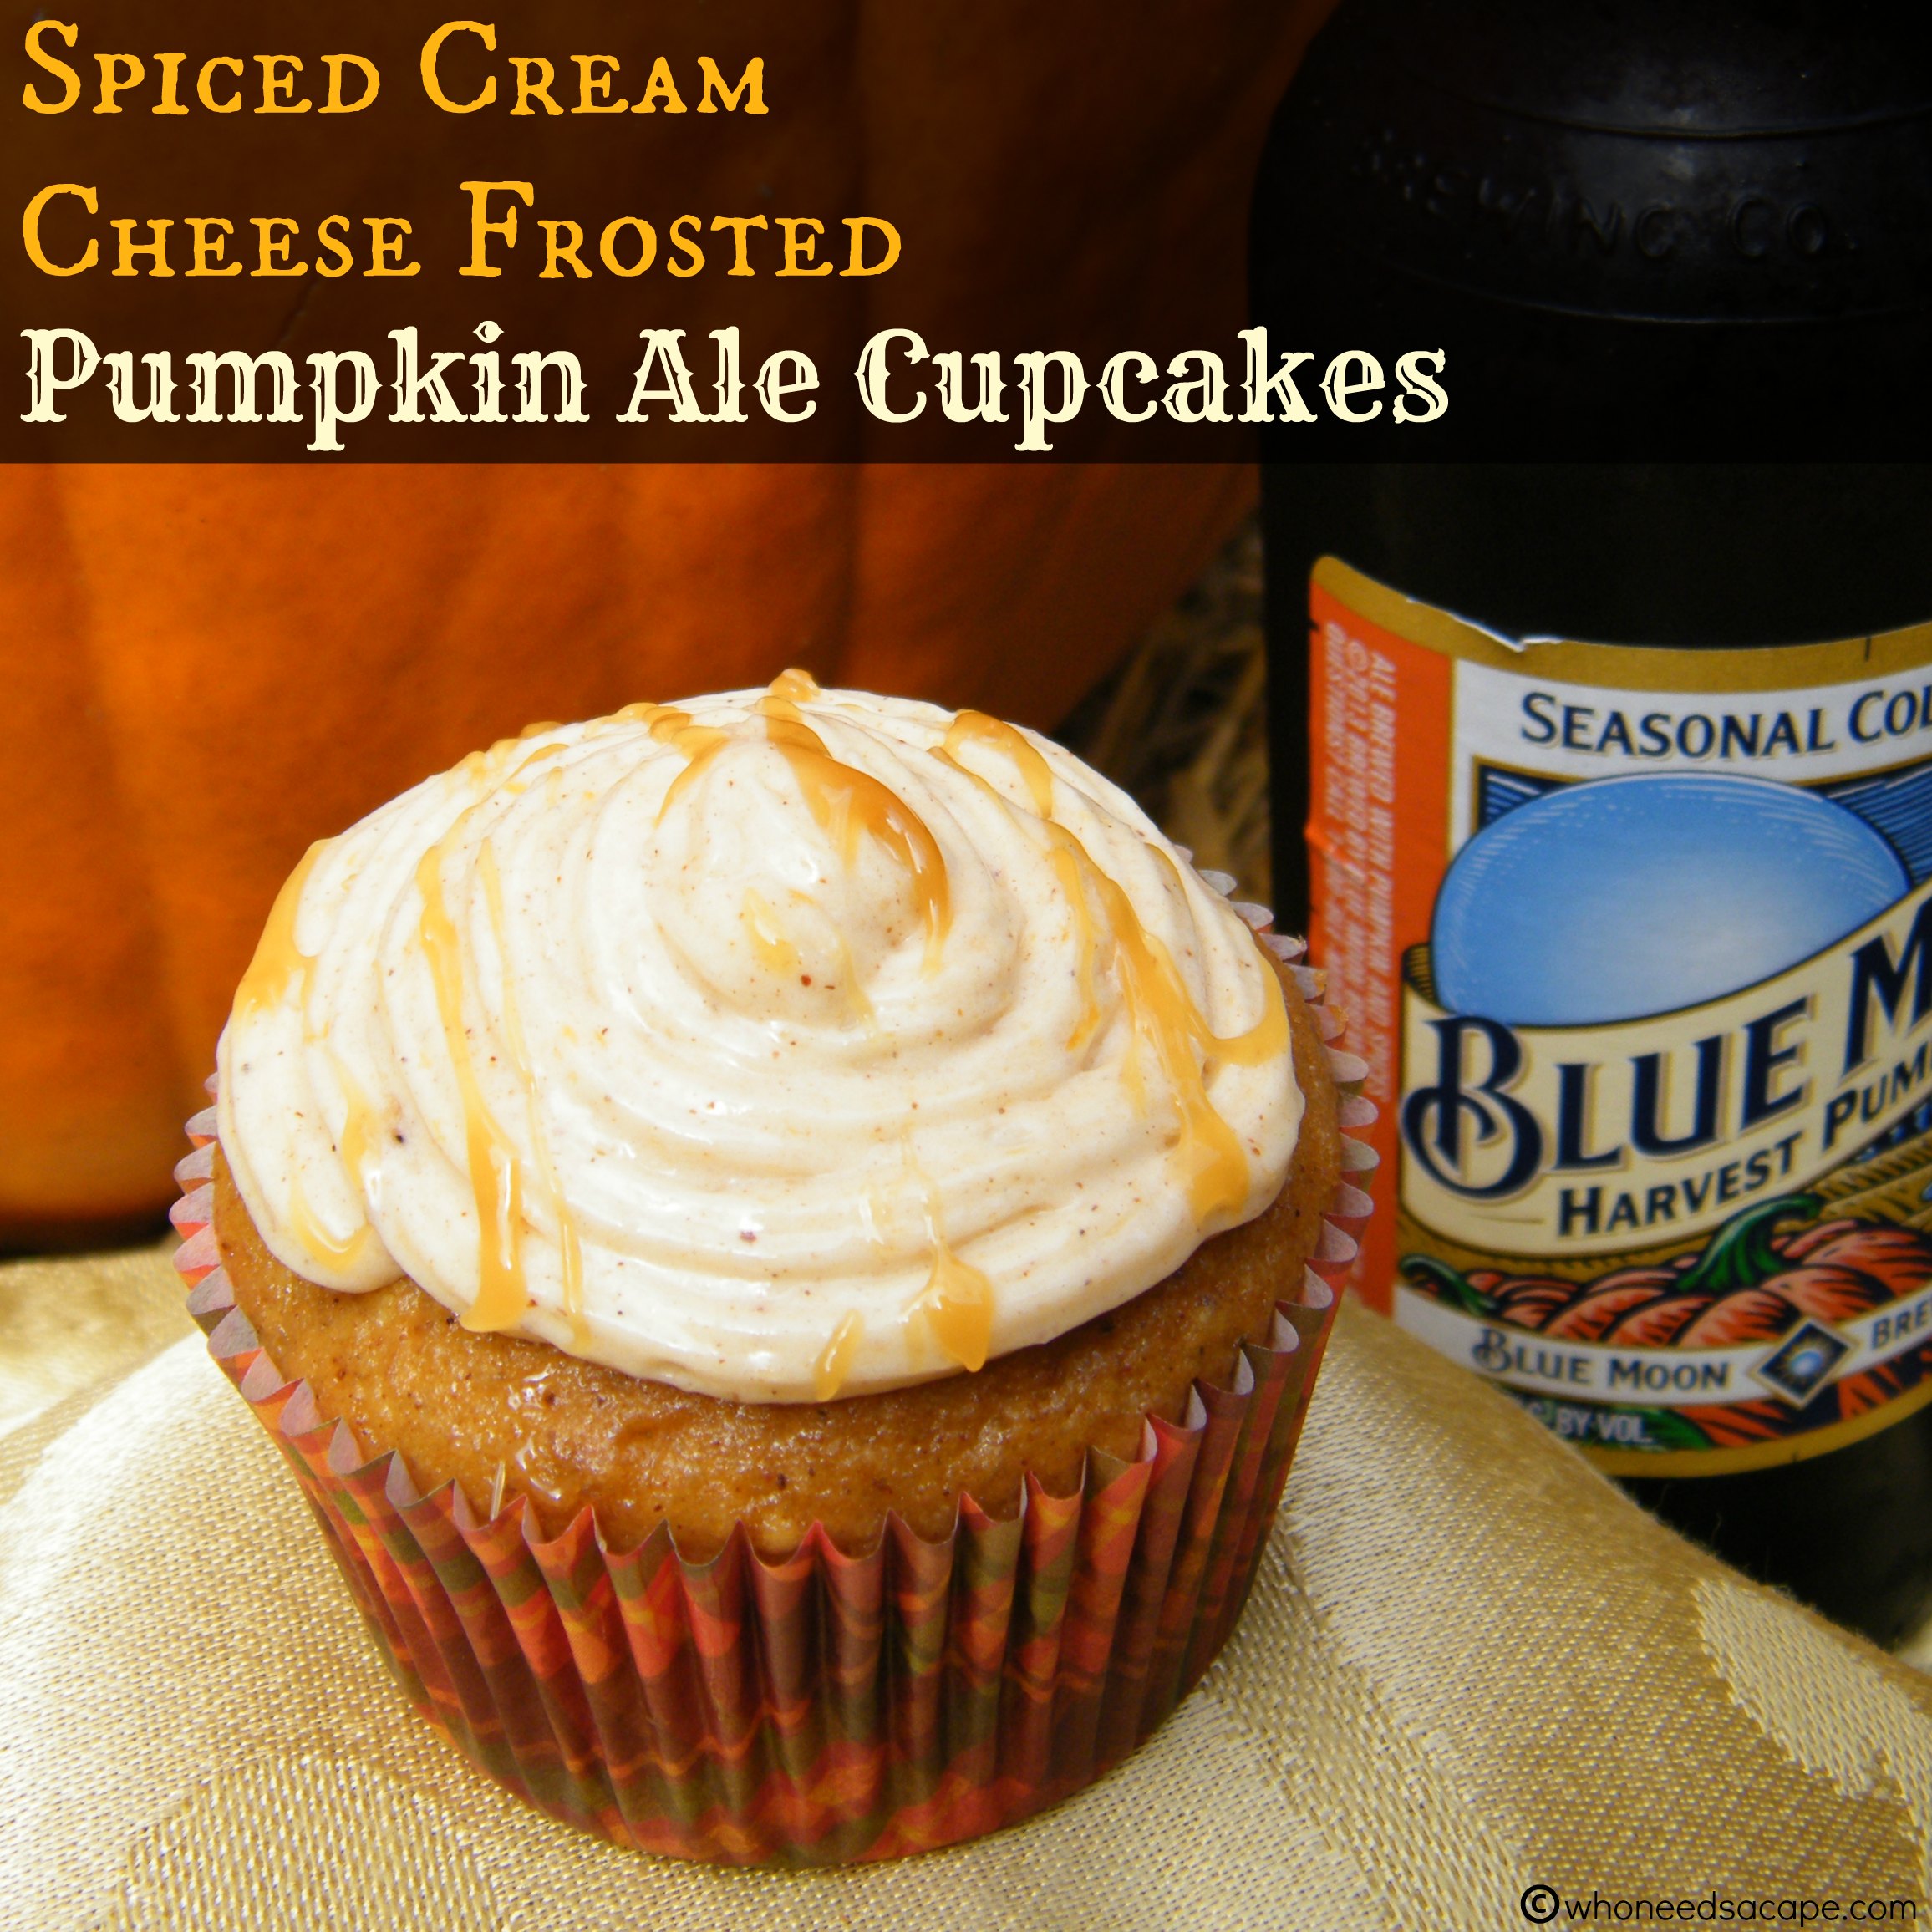 Cream Cheese Frosted Spiced Pumpkin Ale Cupcakes